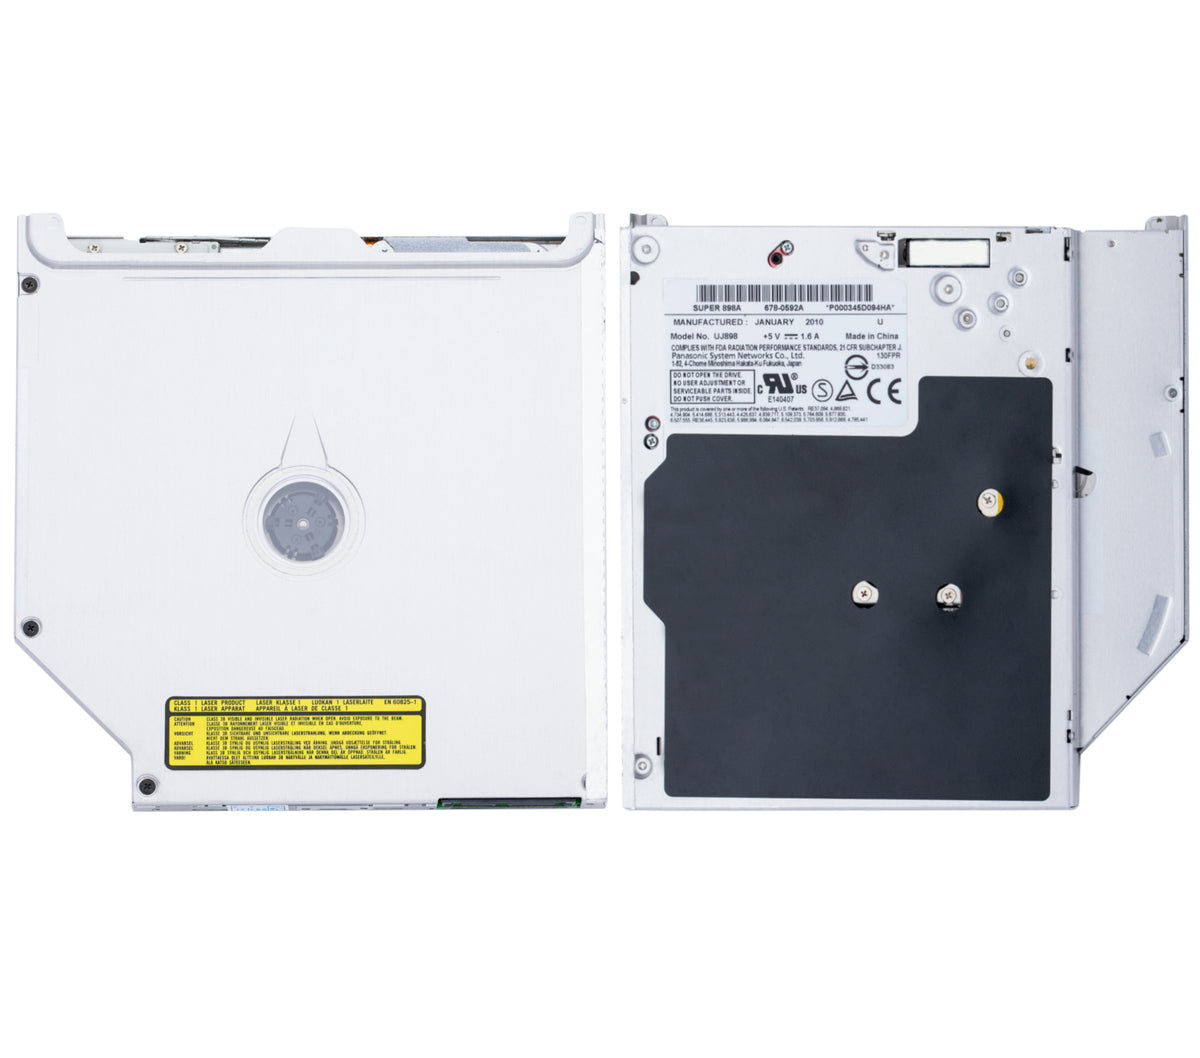 SUPERDRIVE (UJ-898) FOR MACBOOK PRO UNIBODY 13"/15"/17" A1286/A1278/A1297 (MID 2009/MID 2010/EARLY 2011/LATE 2011/MID 2012)